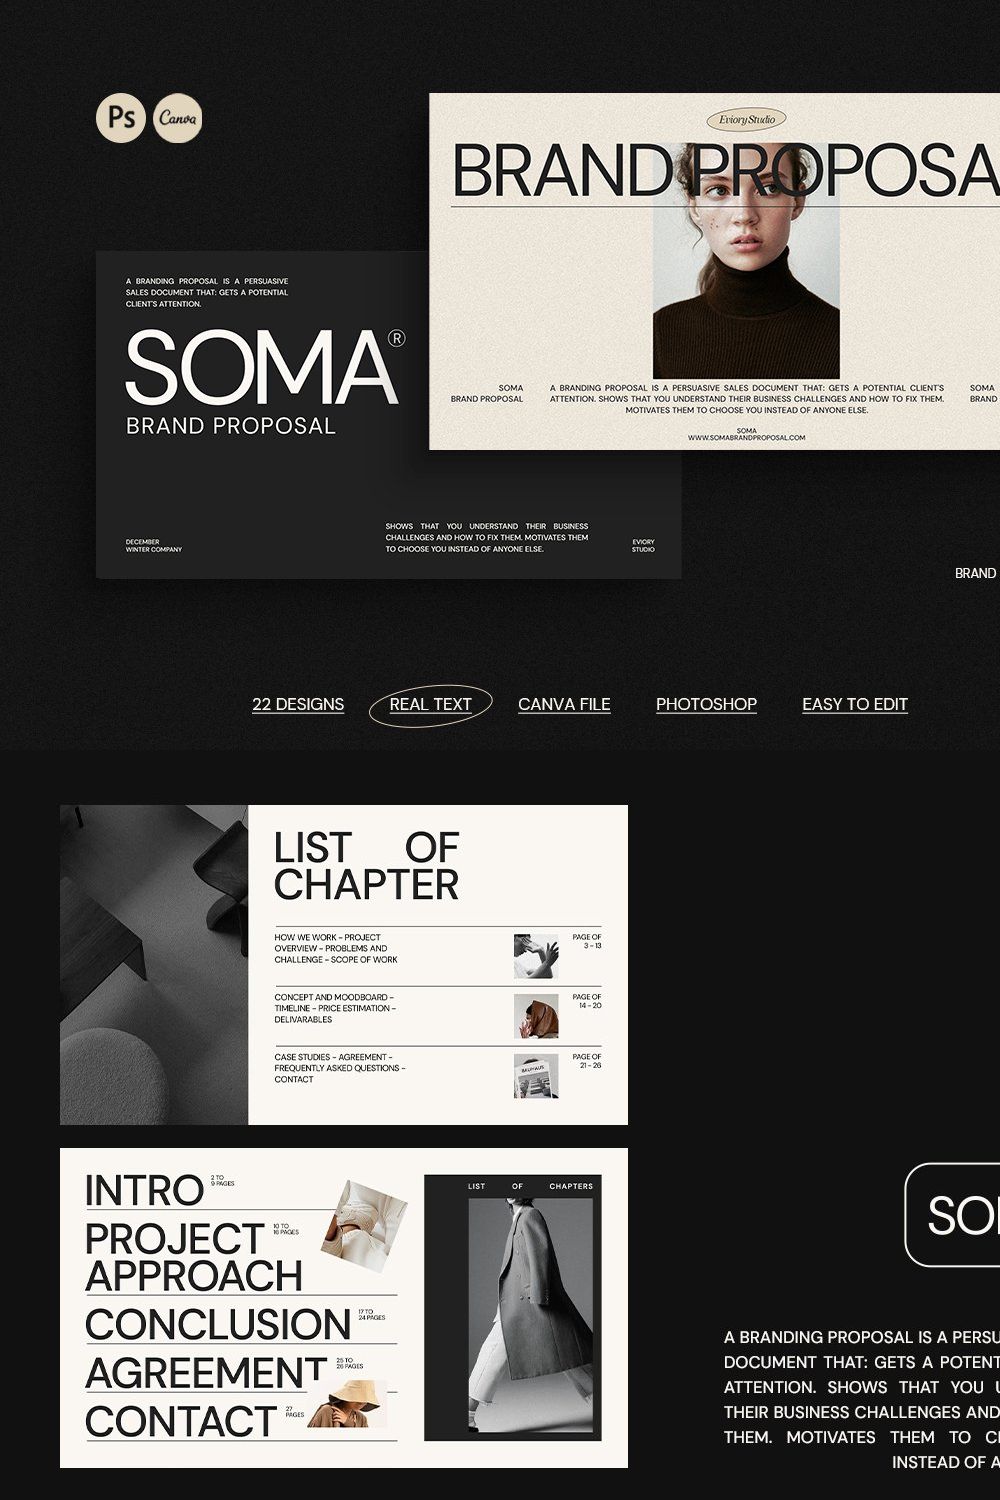 SOMA Brand Proposal CANVA PS pinterest preview image.